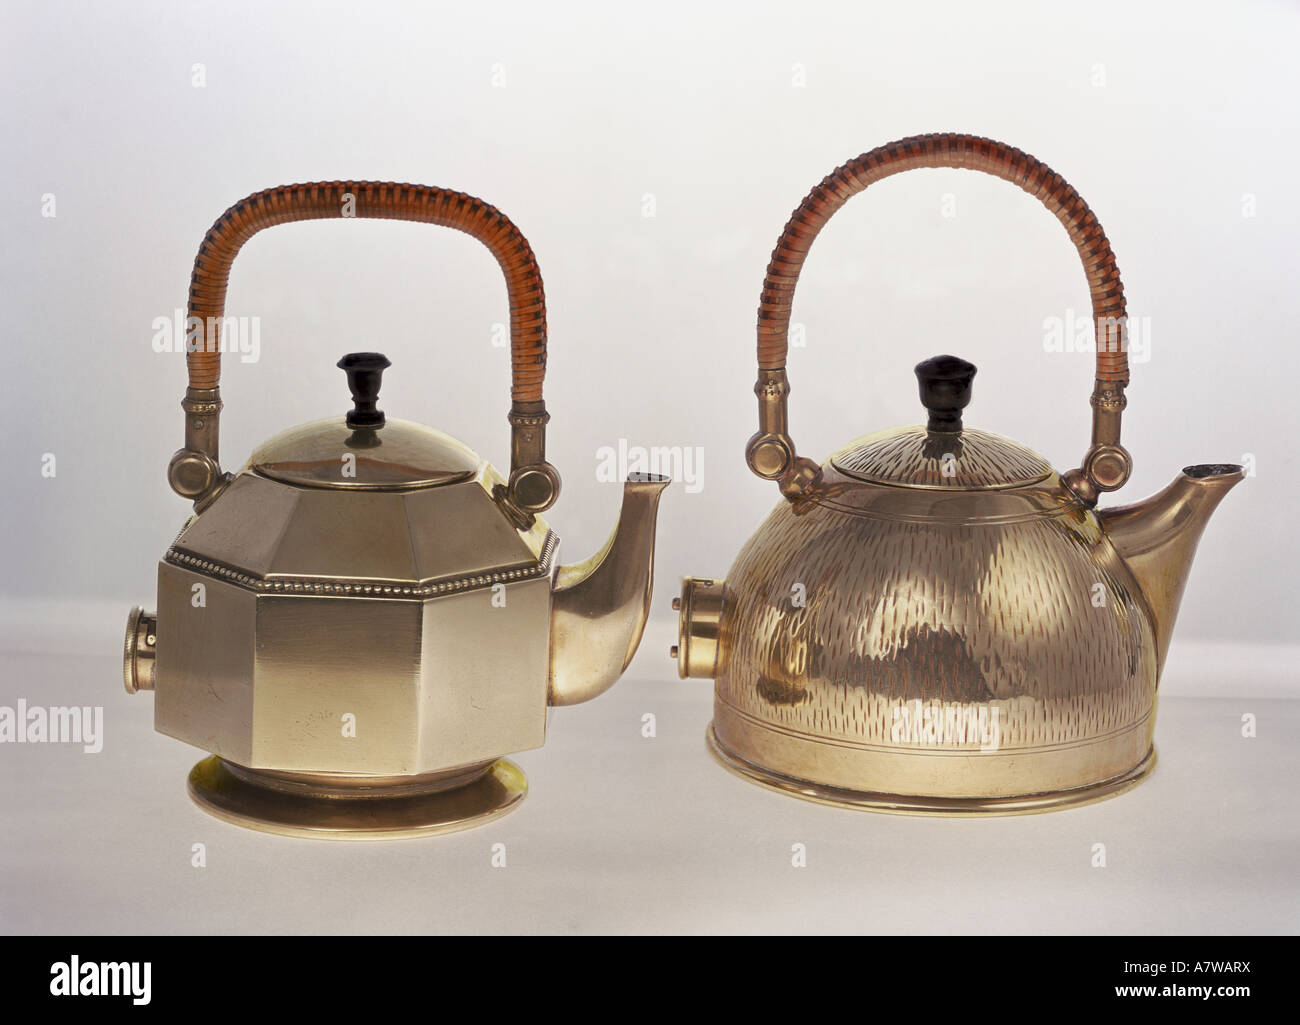 https://c8.alamy.com/comp/A7WARX/household-household-appliances-kettle-two-electric-kettles-design-A7WARX.jpg